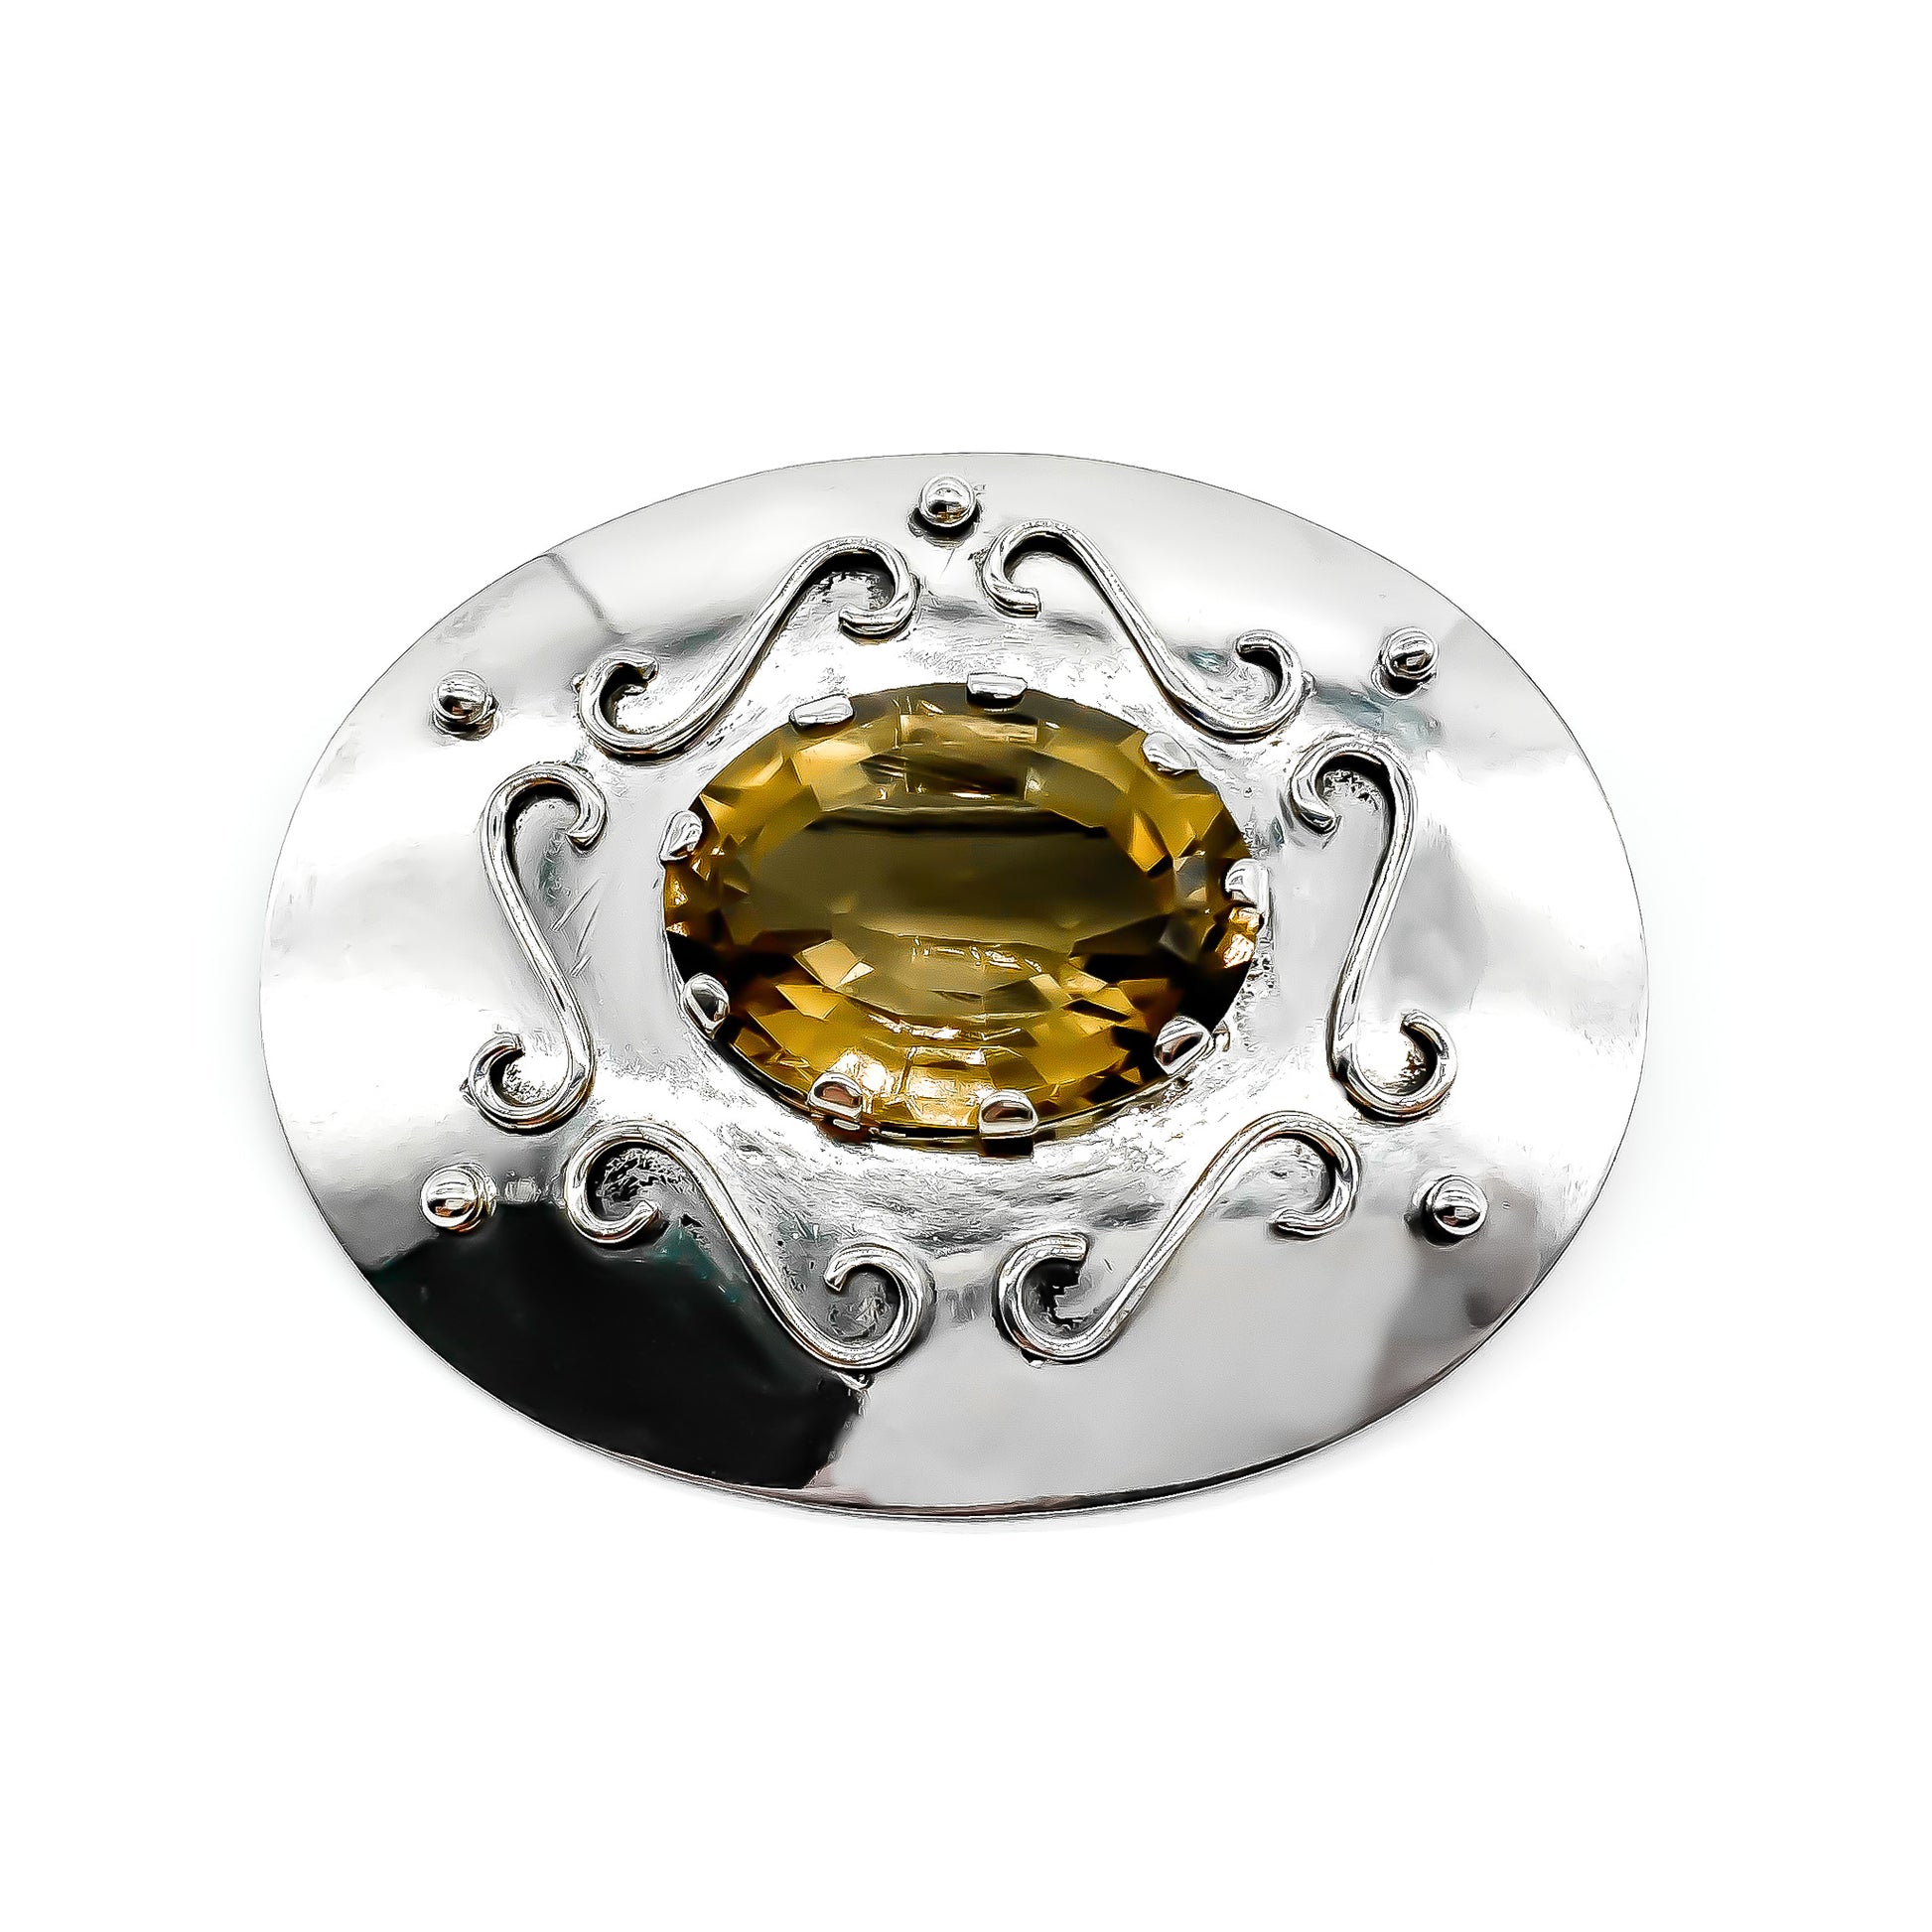 Impressive vintage silver handmade brooch set with a beautifully faceted oval smoky quartz.   Circa 1950’s